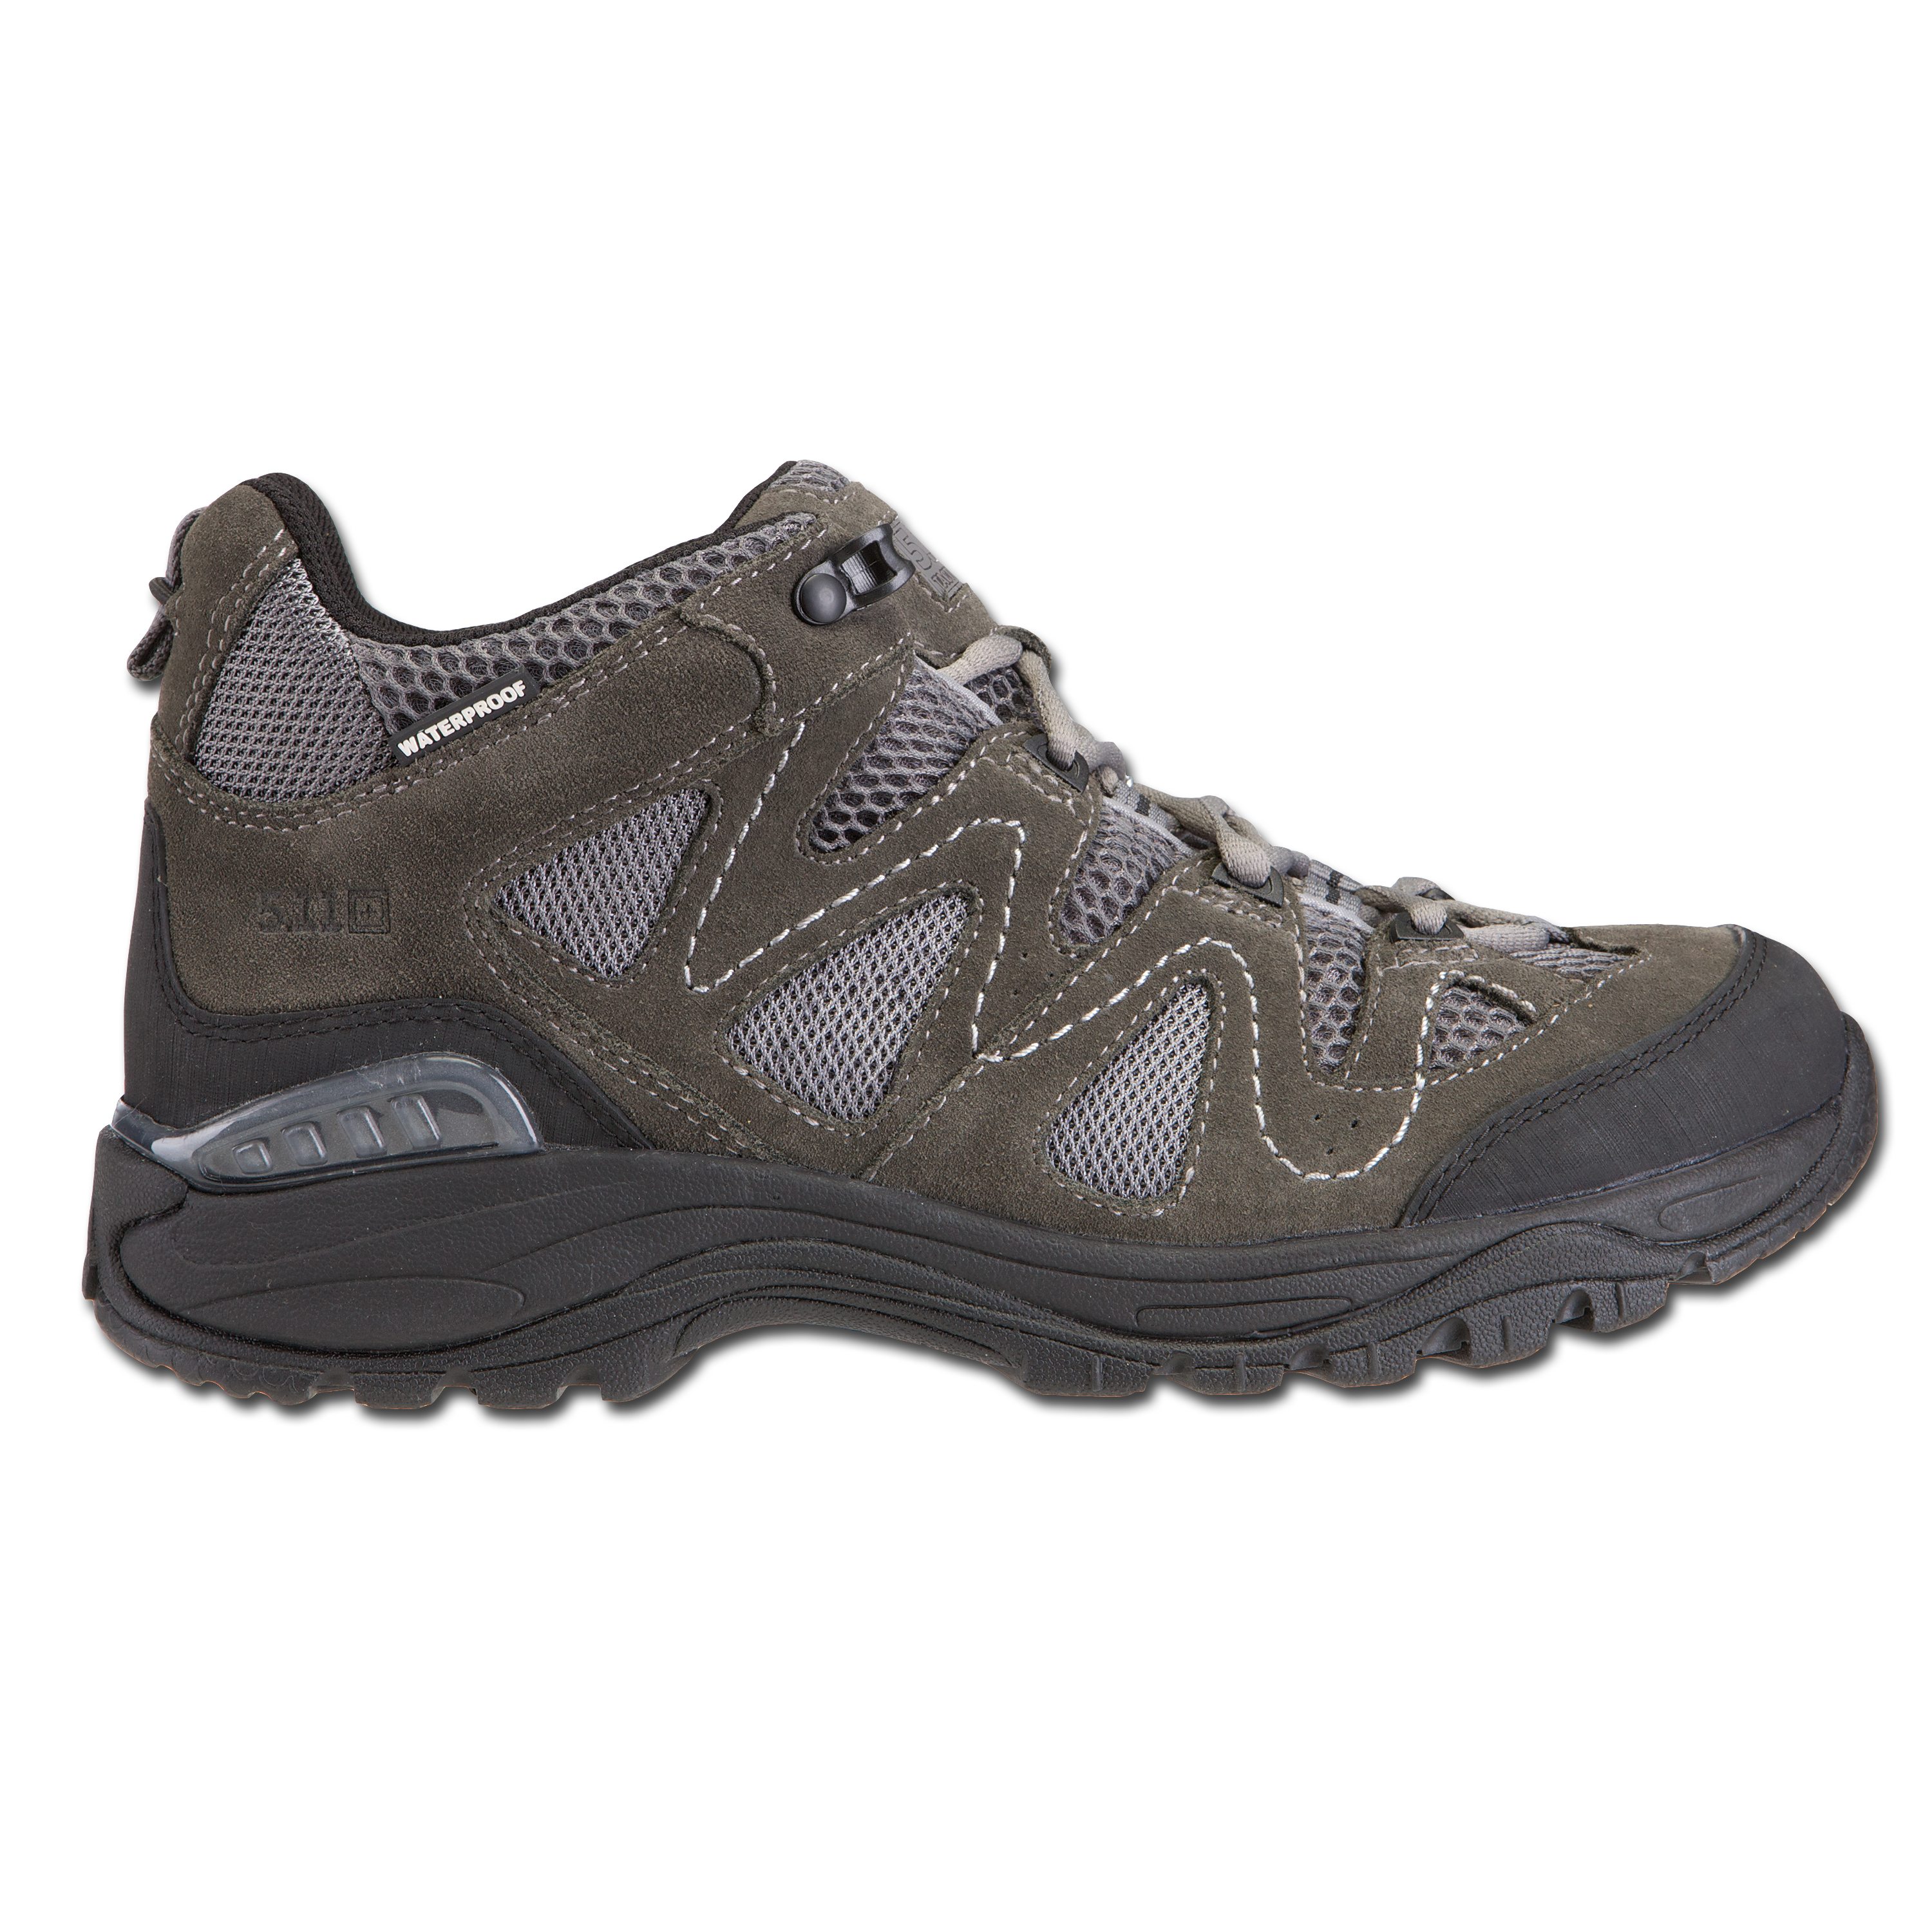 5.11 Tactical Trainer Mid 2.0, anthracite | 5.11 Tactical Trainer Mid 2 ...